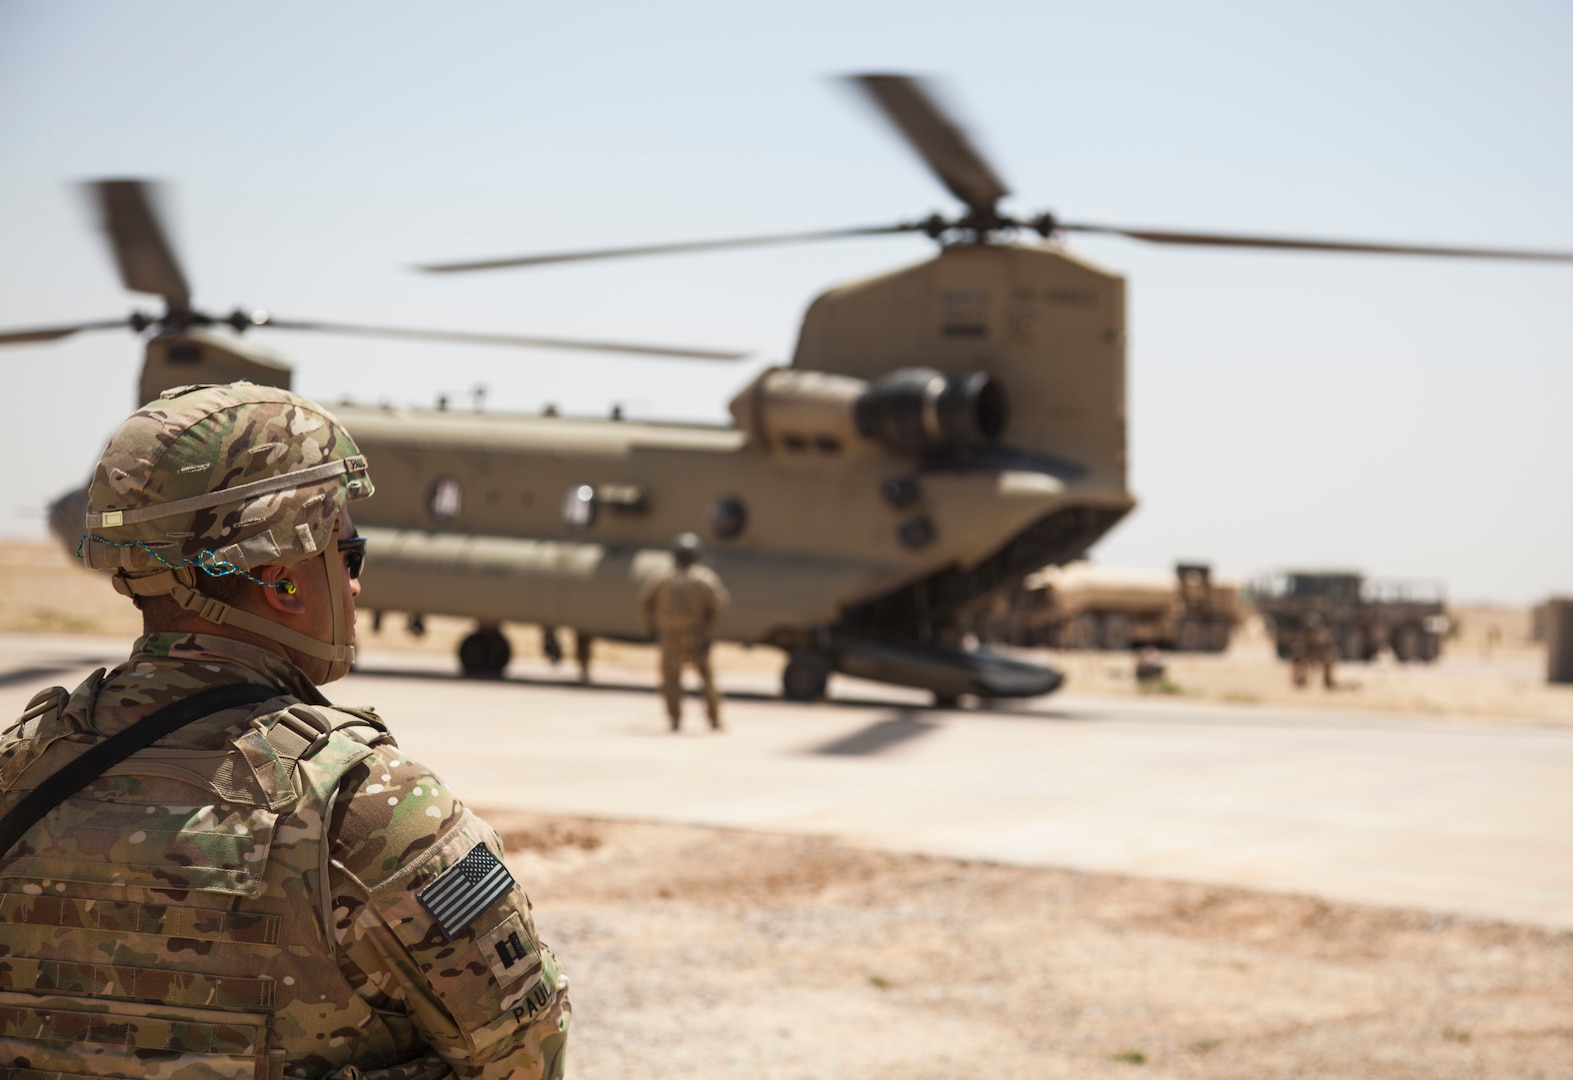 A U.S. soldier deployed in support of Combined Joint Task Force Operation Inherent Resolve waits while a CH-47 Chinook is refueled at Qayyarah West Airfield, Iraq, May 29, 2017. Army photo by Cpl. Rachel Diehm